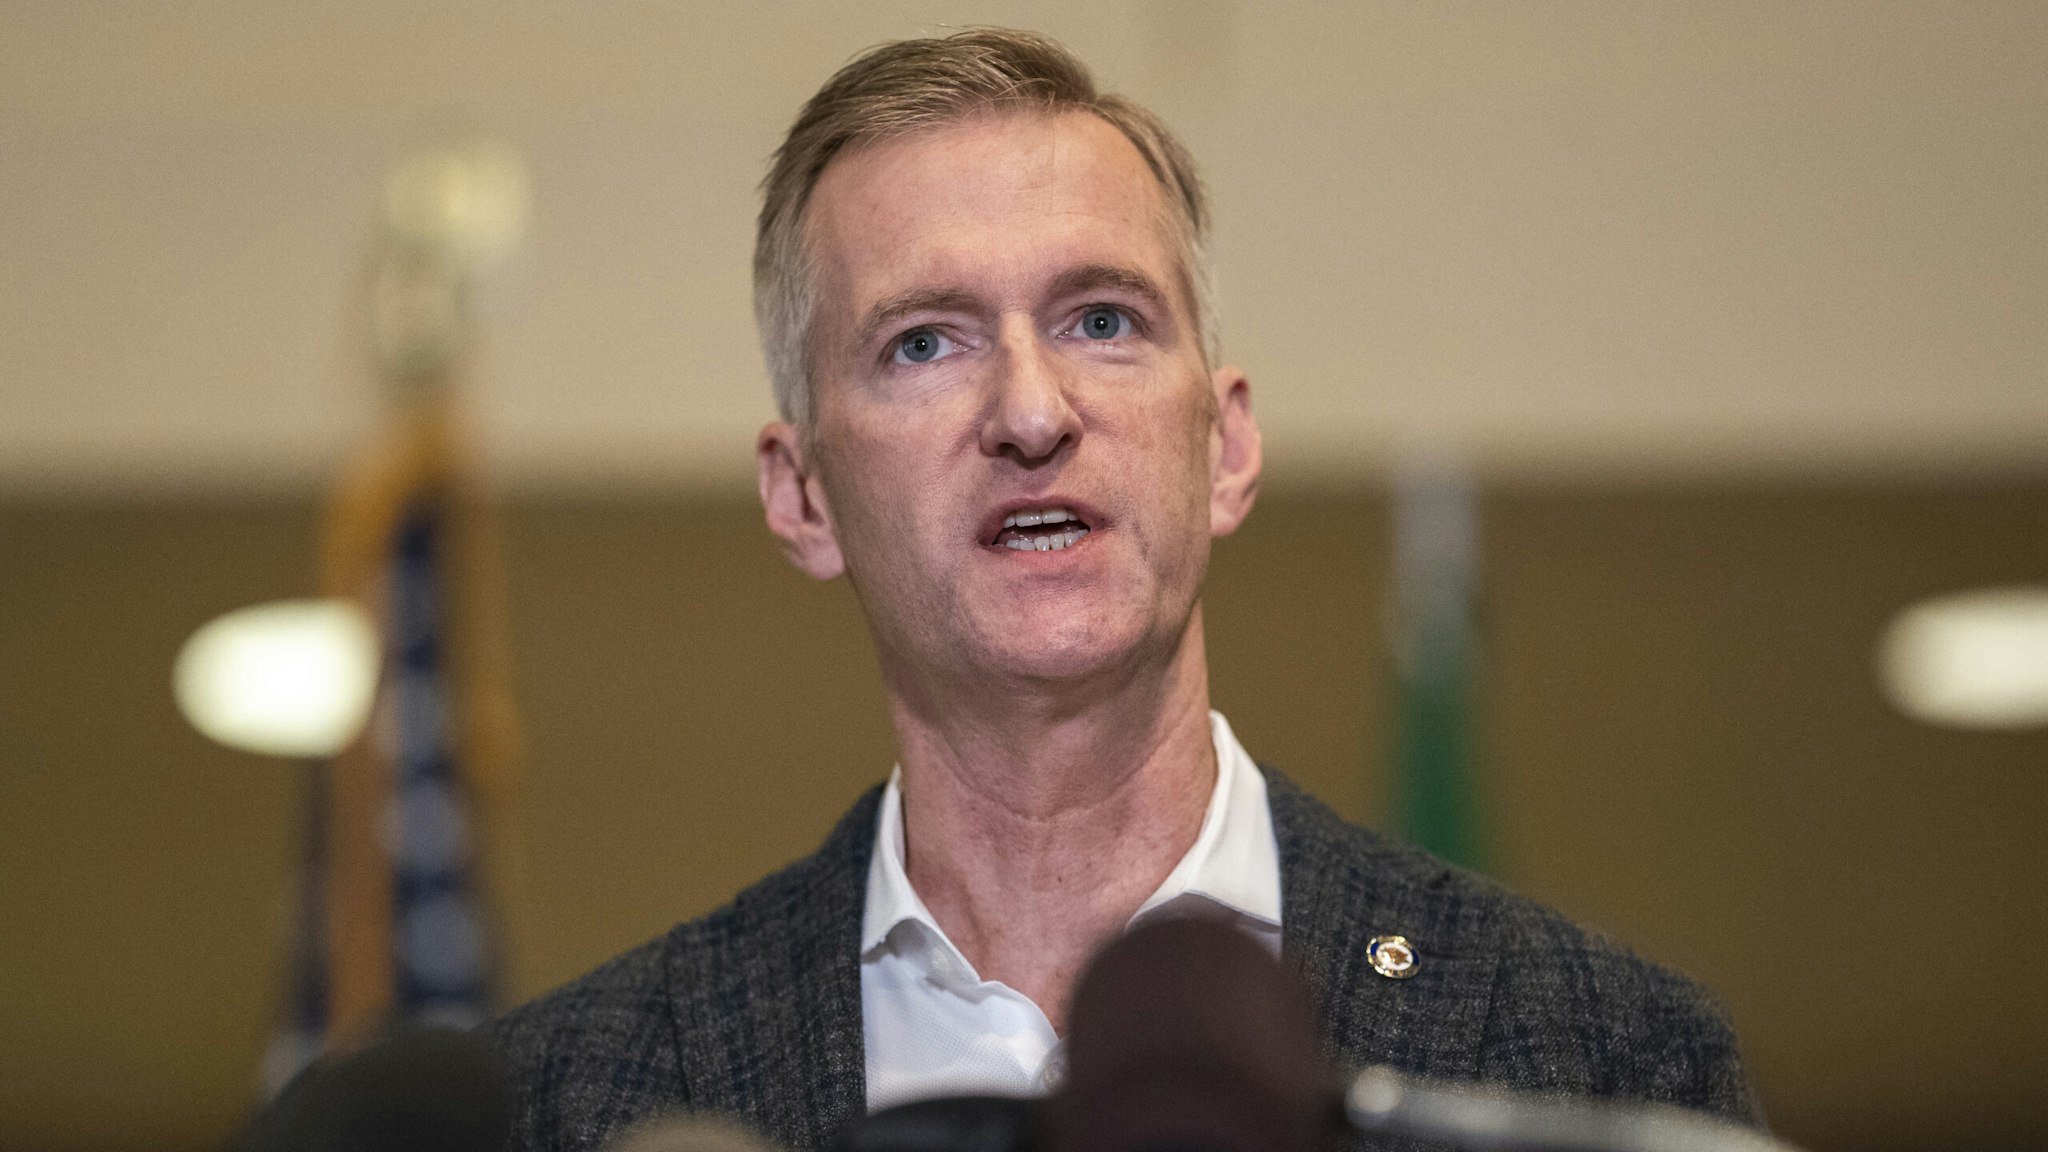 PORTLAND, OR - AUGUST 30: Portland Mayor Ted Wheeler speaks to the media at City Hall on August 30, 2020 in Portland, Oregon. A man was fatally shot Saturday night as a Pro-Trump rally clashed with Black Lives Matter protesters in downtown Portland.